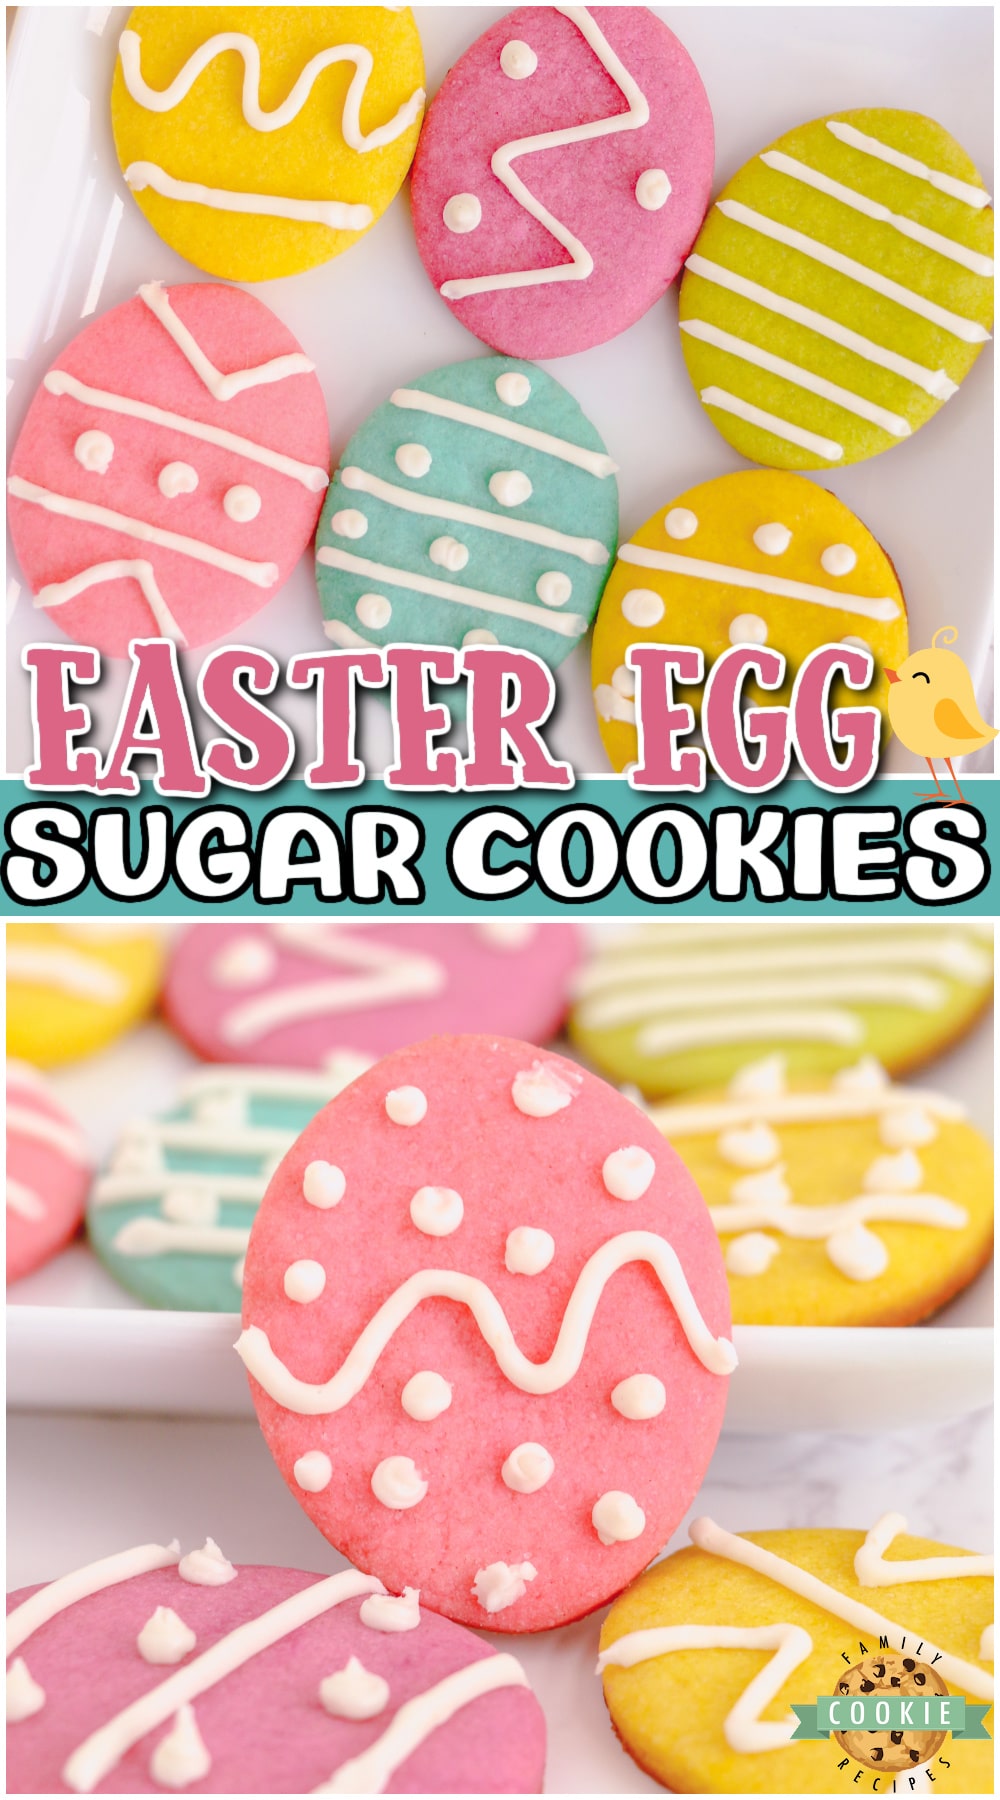 Easter Egg Sugar Cookies made with classic ingredients for festive, colorful Easter Egg cookies! Pastel Easter cookies with a vanilla icing everyone loves!  via @buttergirls